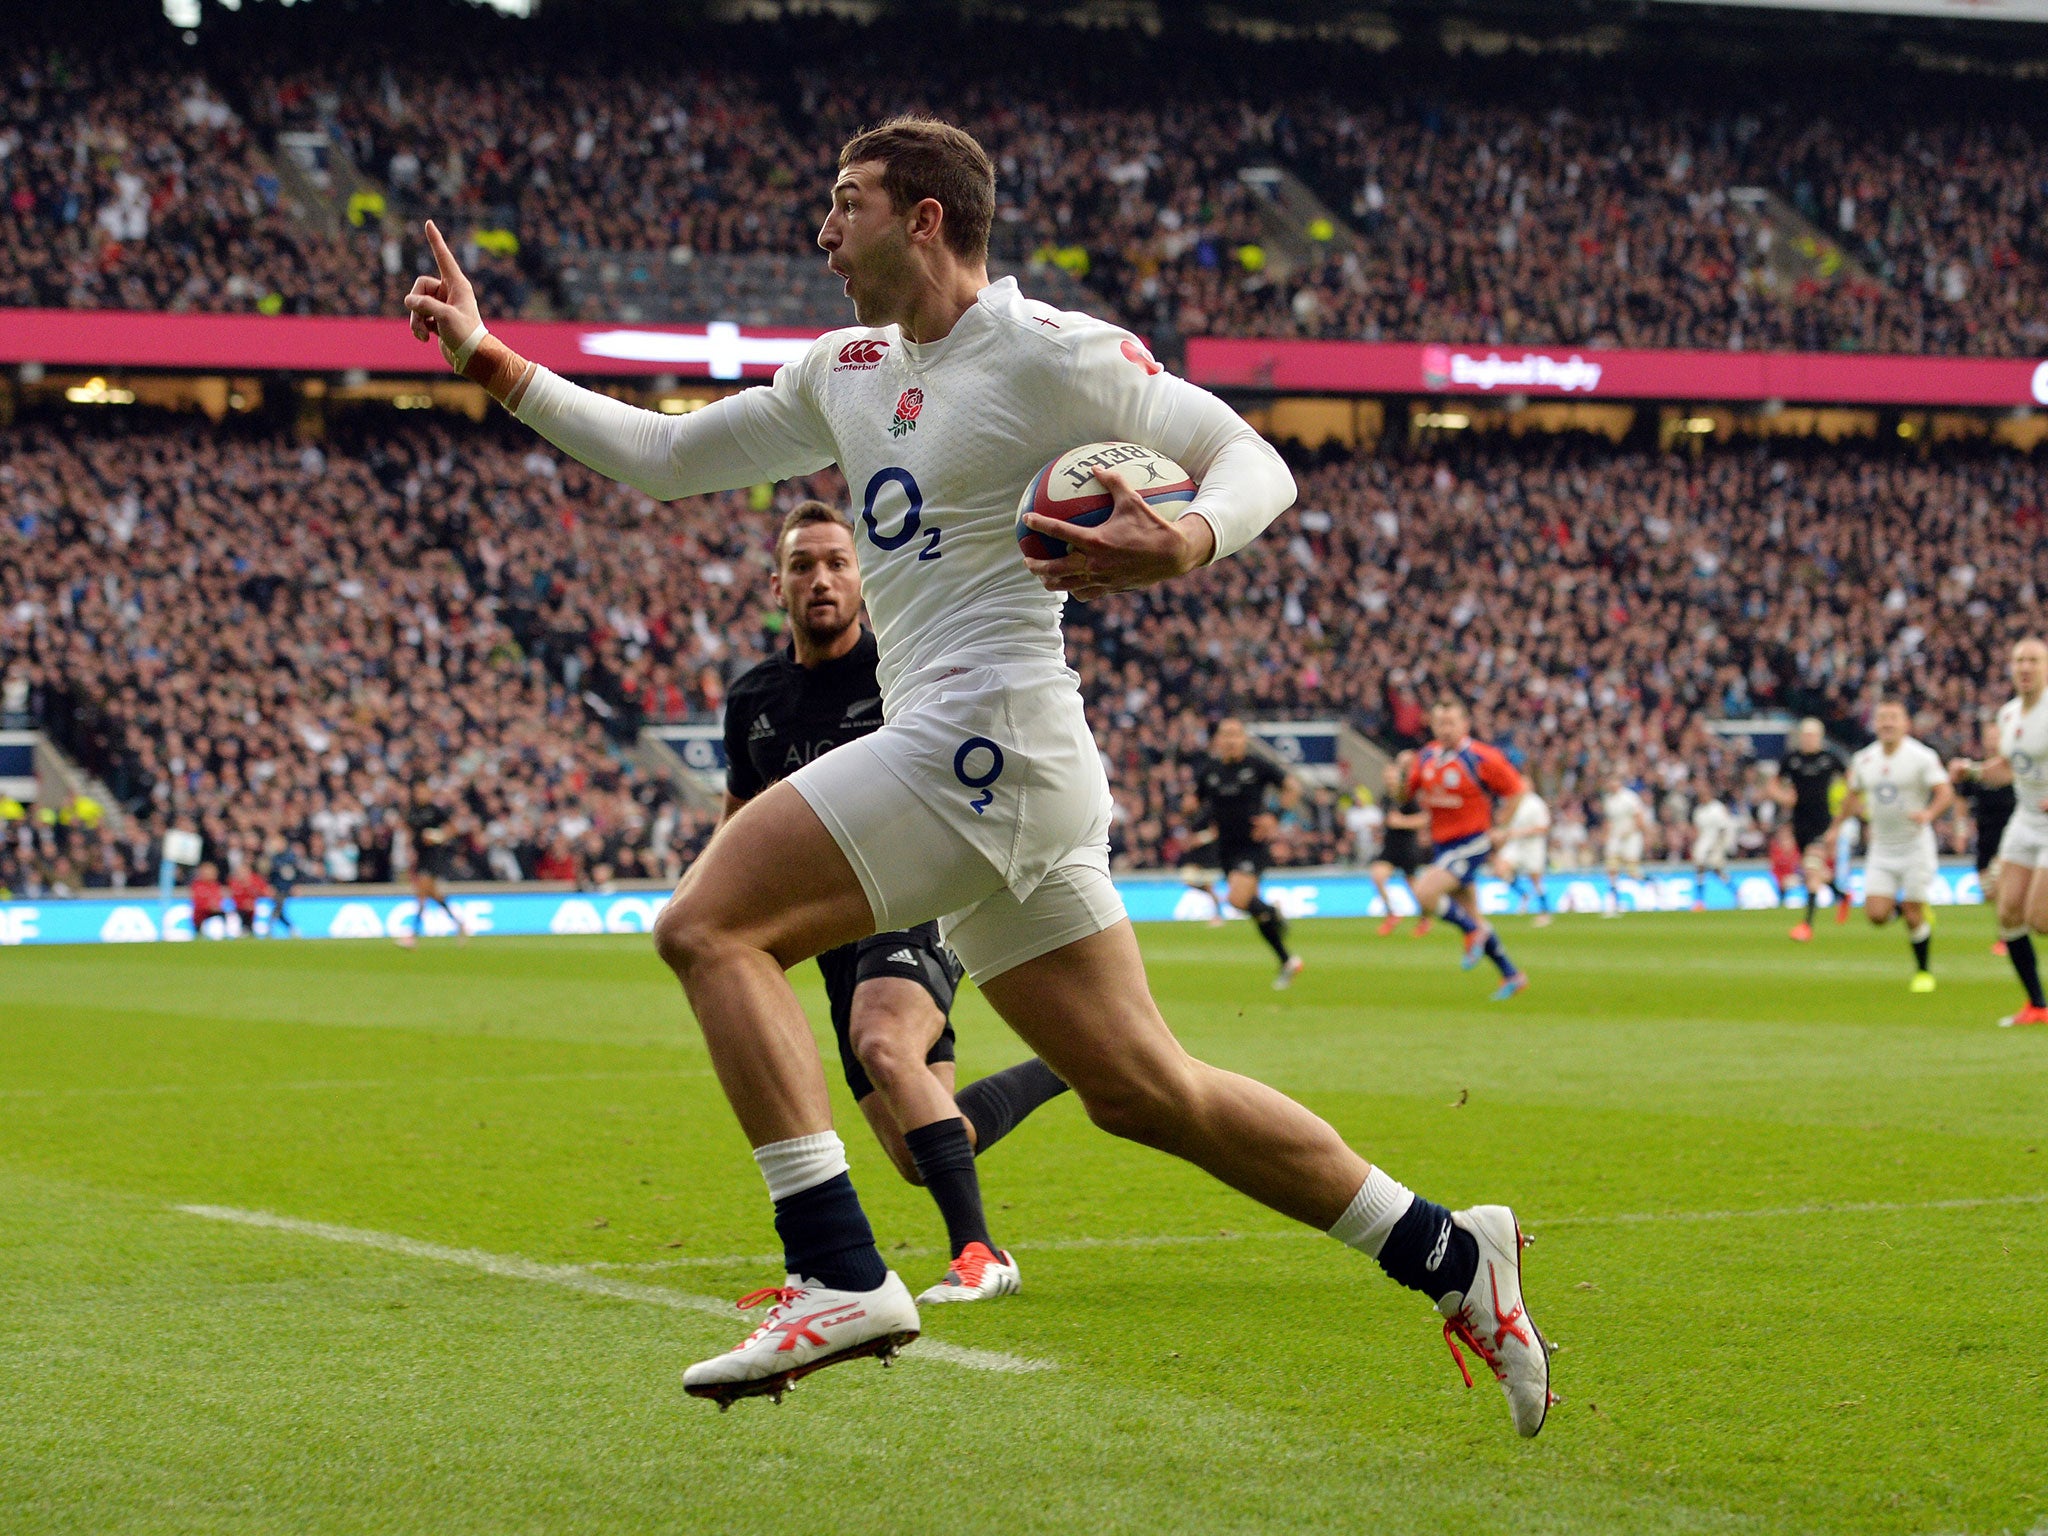 May on his way to a try at Twickenham